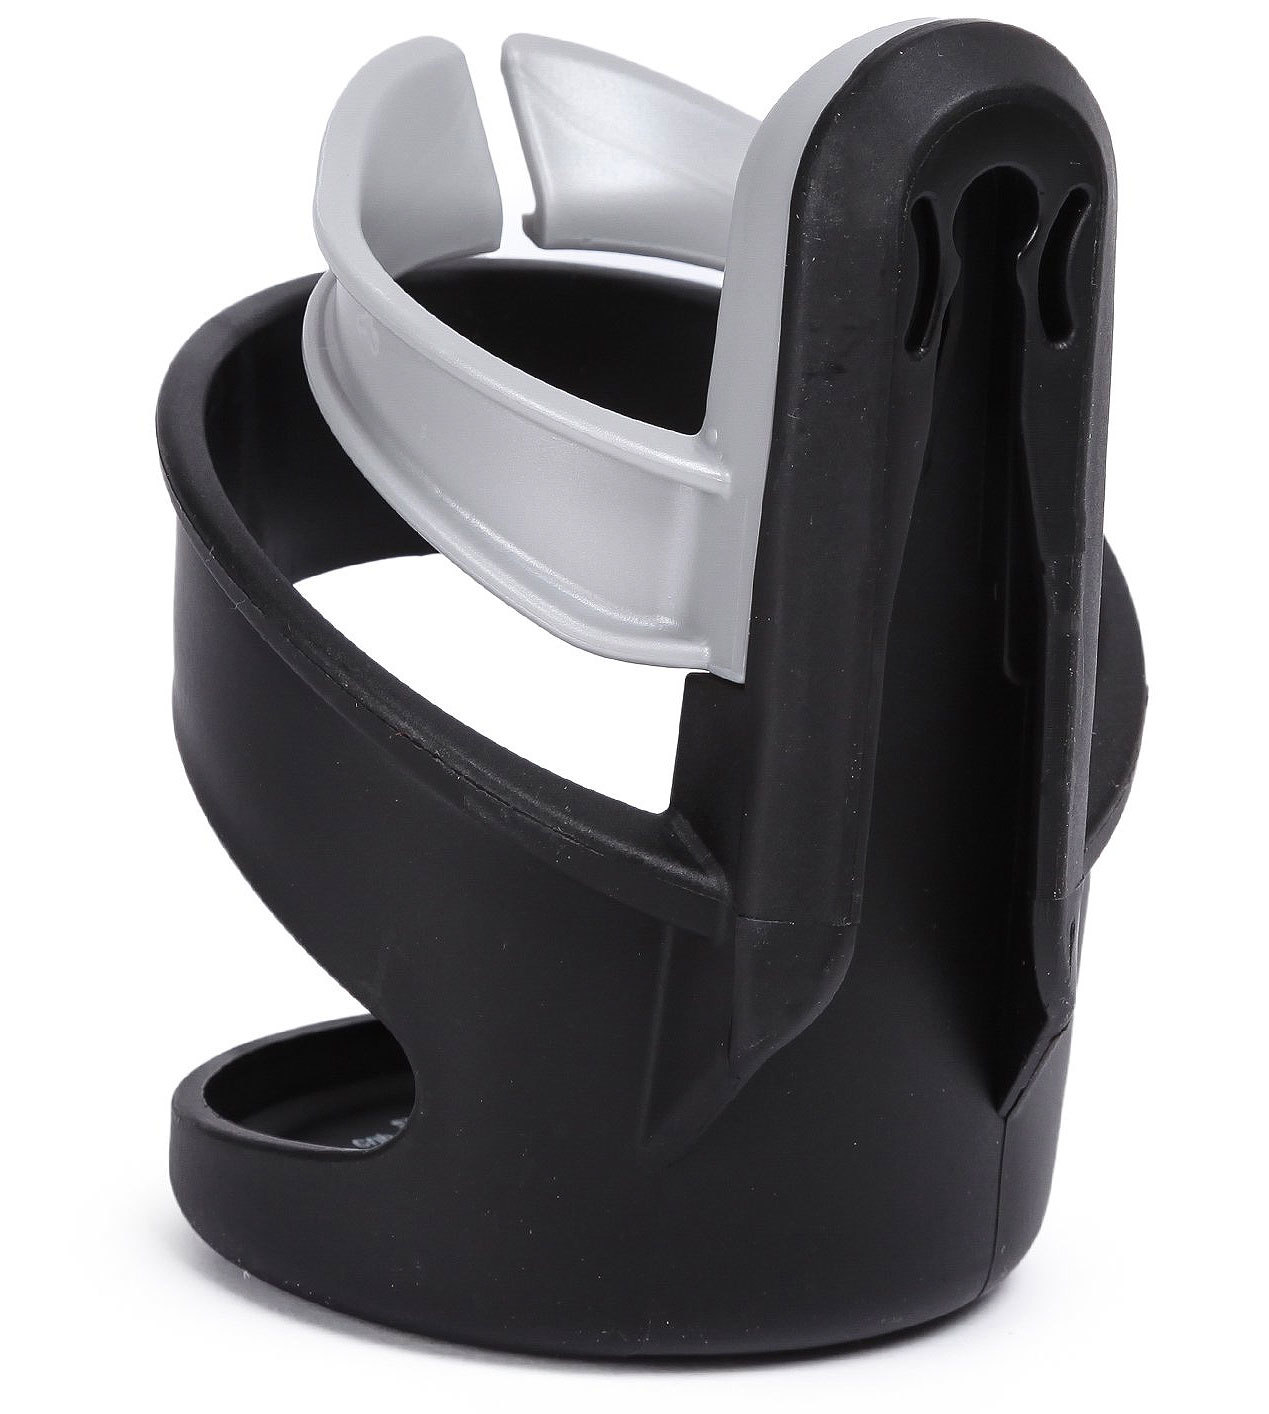 peg perego cup holder